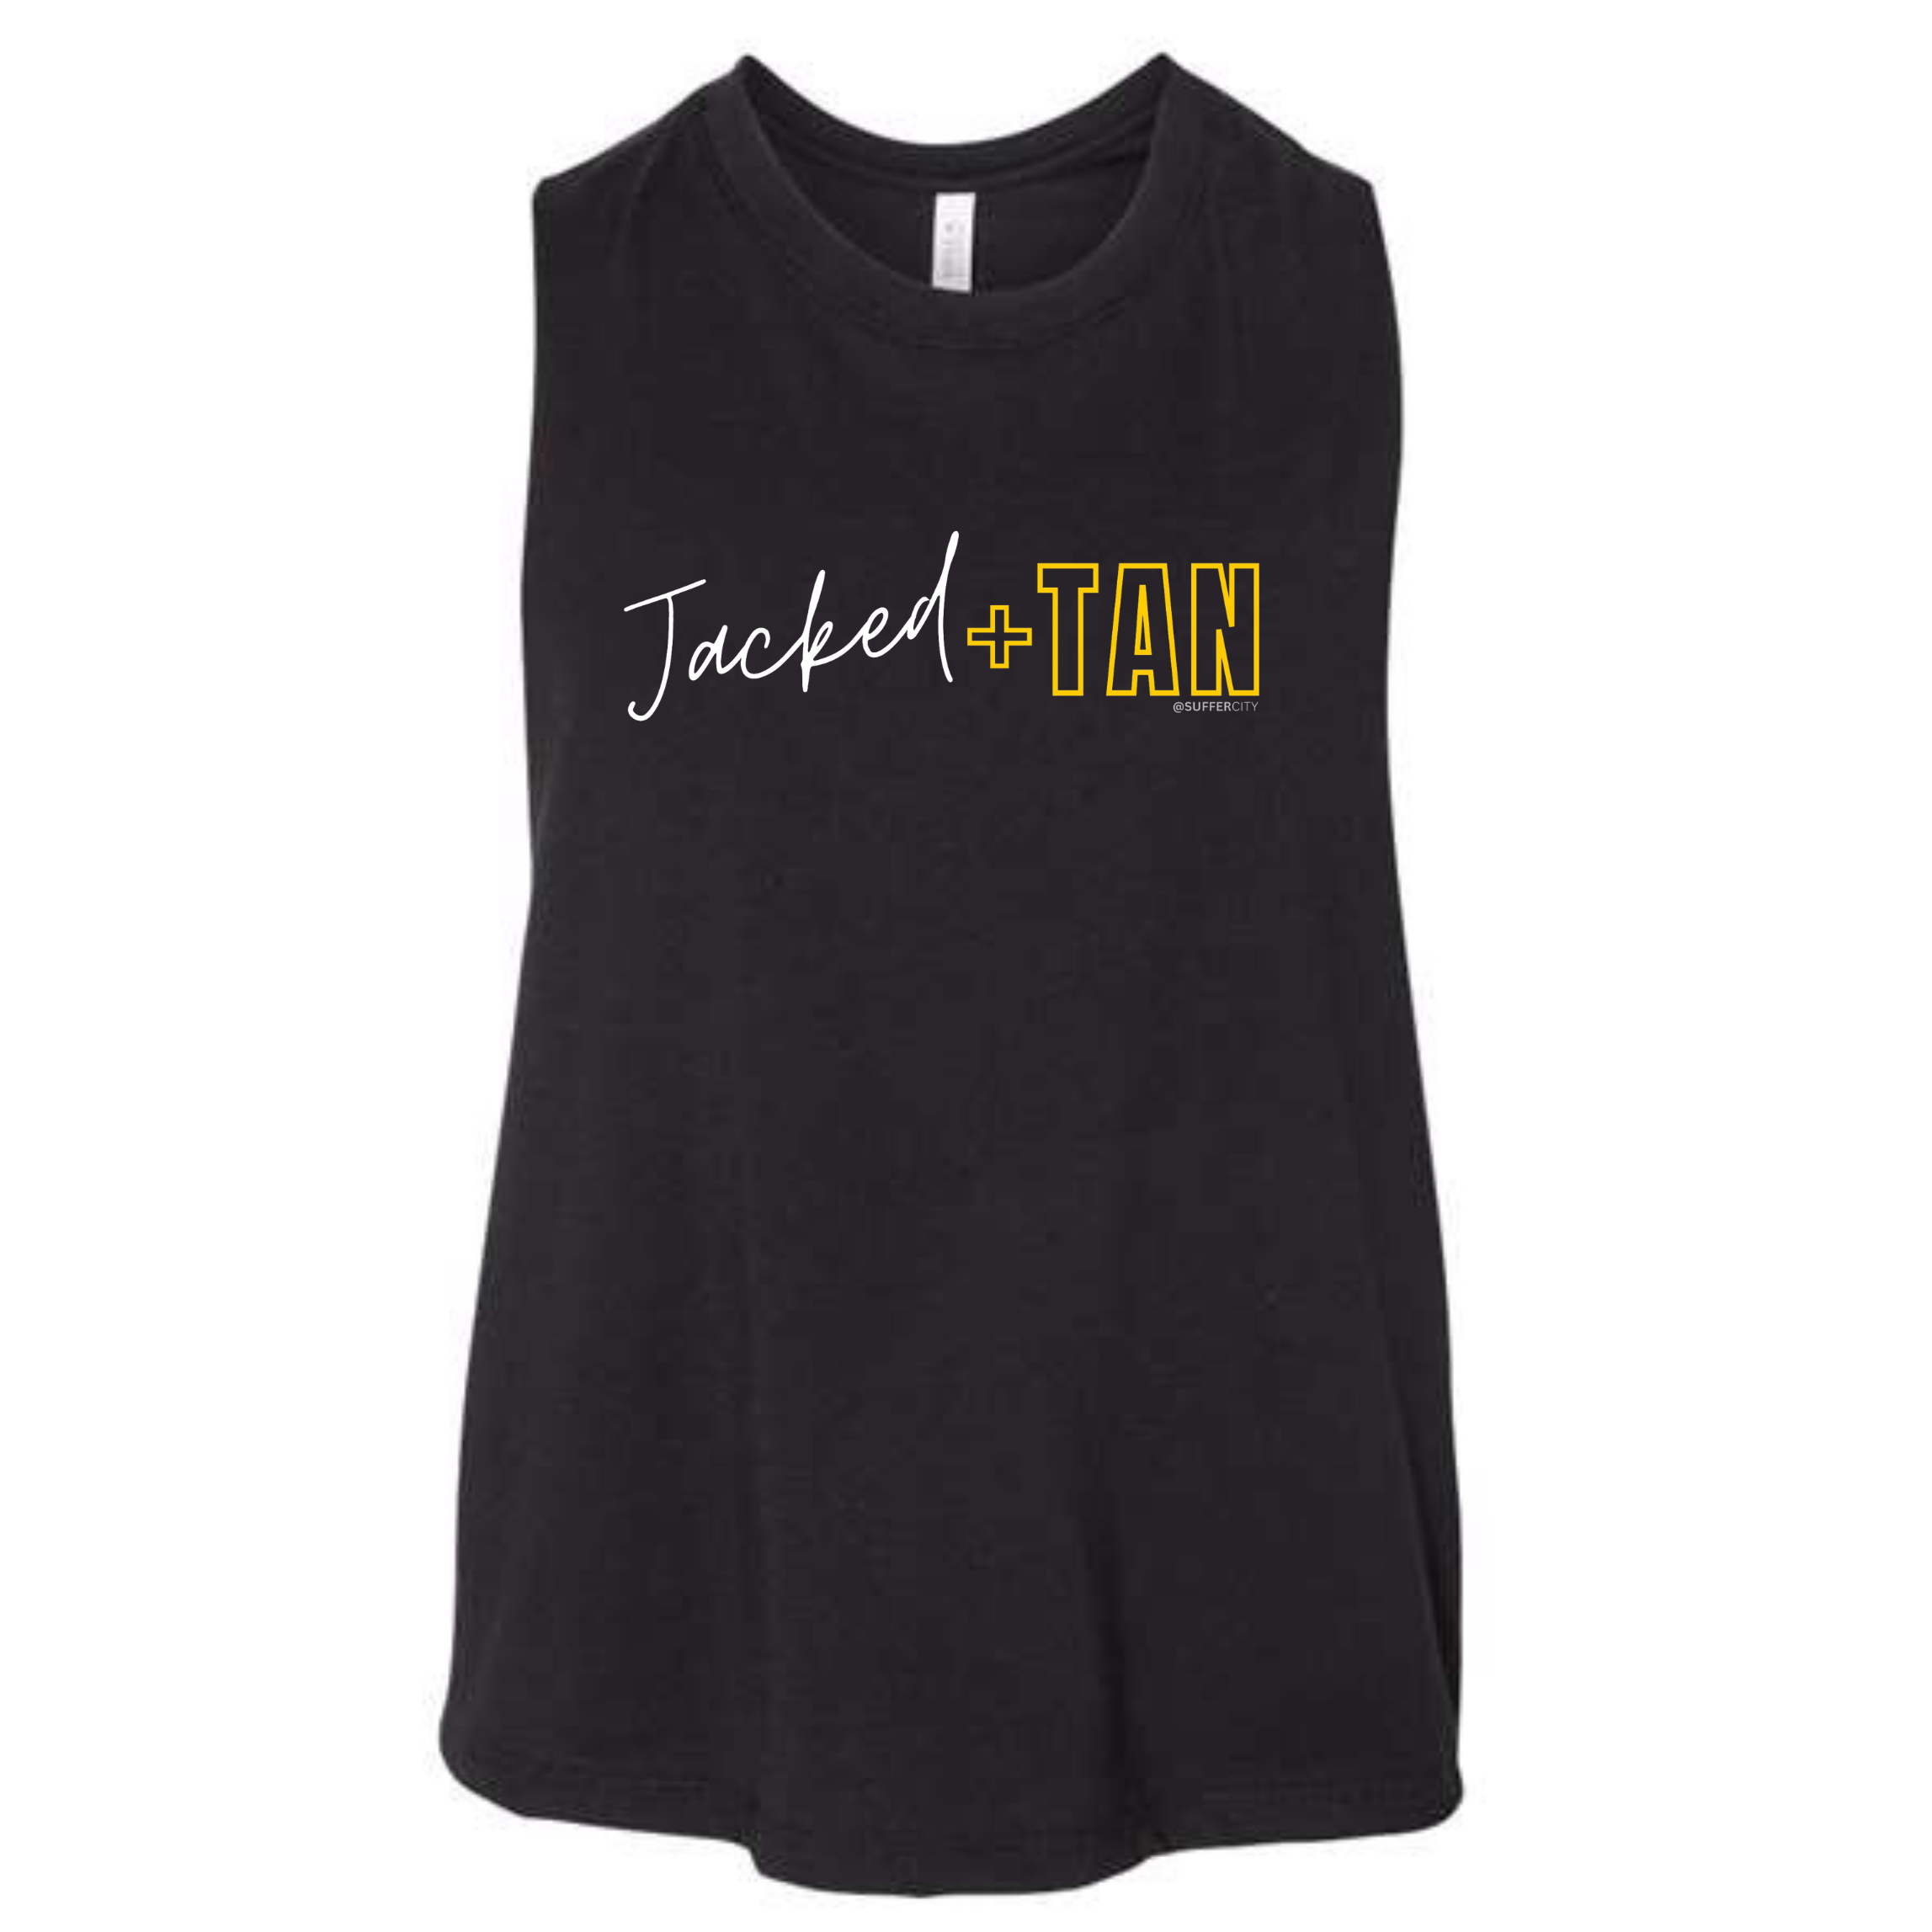 Jacked & Tan “Cooler" Options